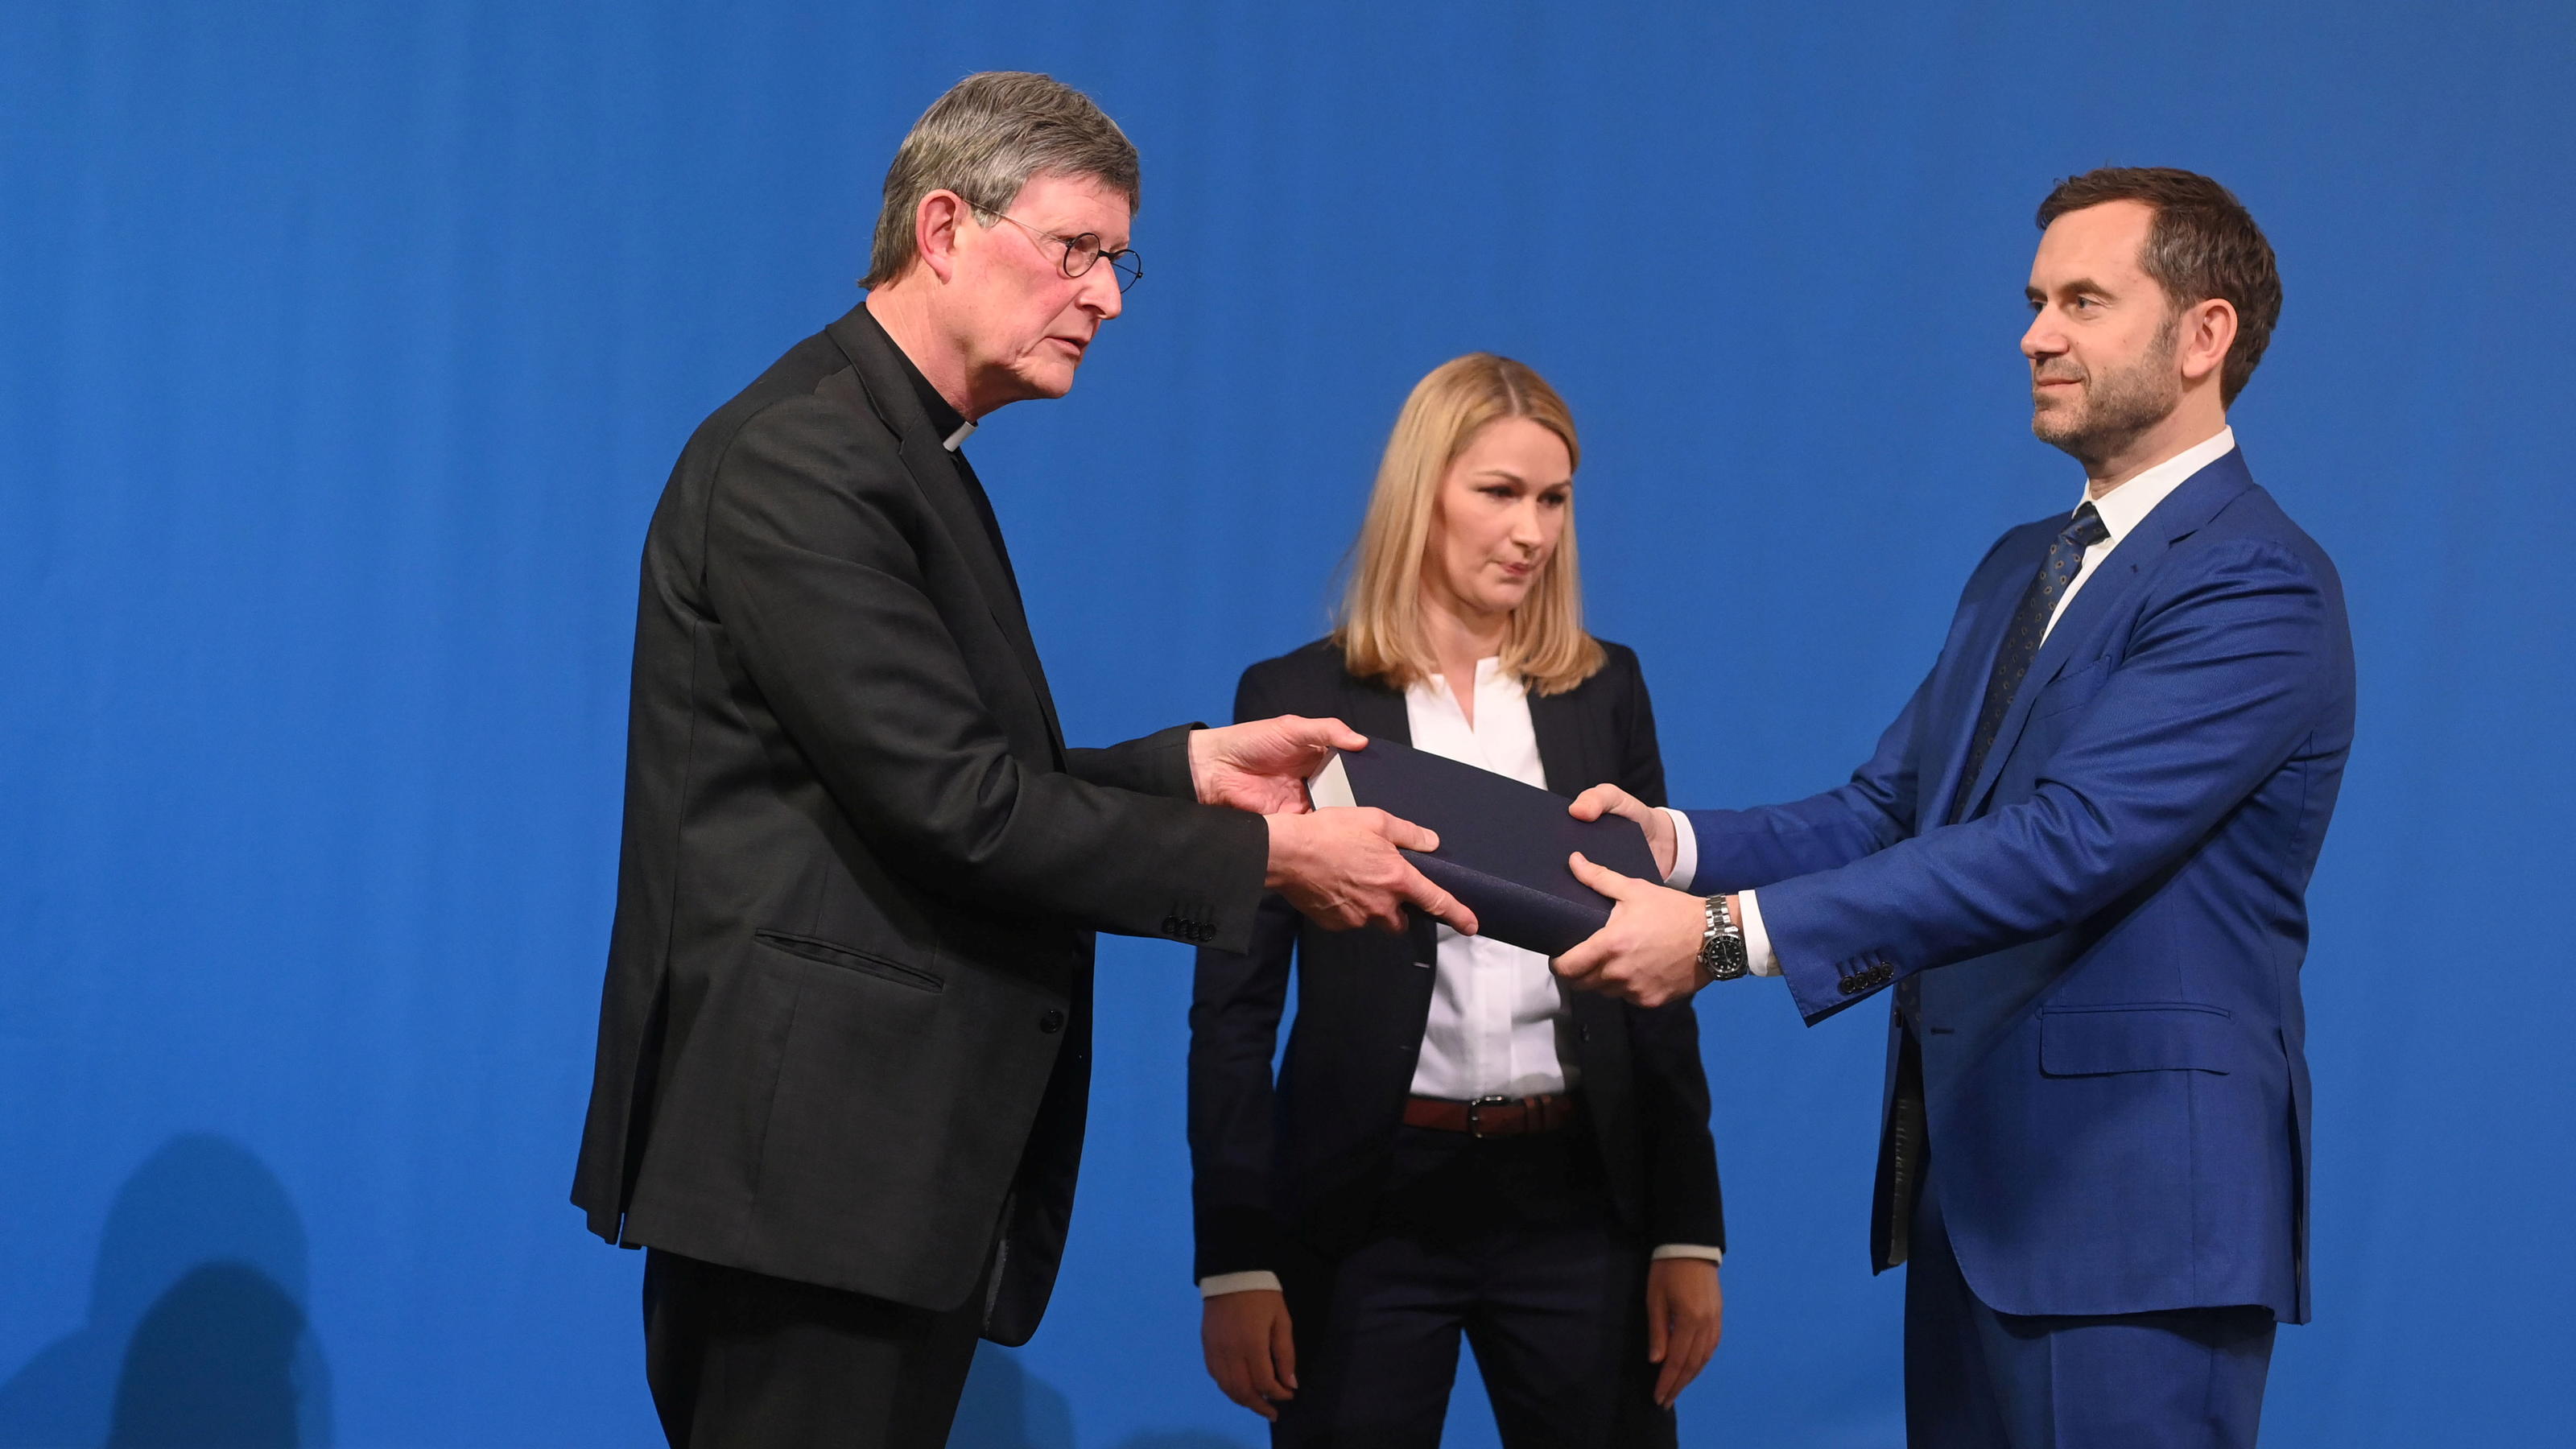 Lawyer Kerstin Stirner (C) looks on as Bjoern Gercke (R), an attorney mandated by the Church, hands over to Cologne's archbishop Rainer Maria Woelki a report on abuse by clergy during a news conference, in Cologne, Germany March 18, 2021.  Ina Fassbe